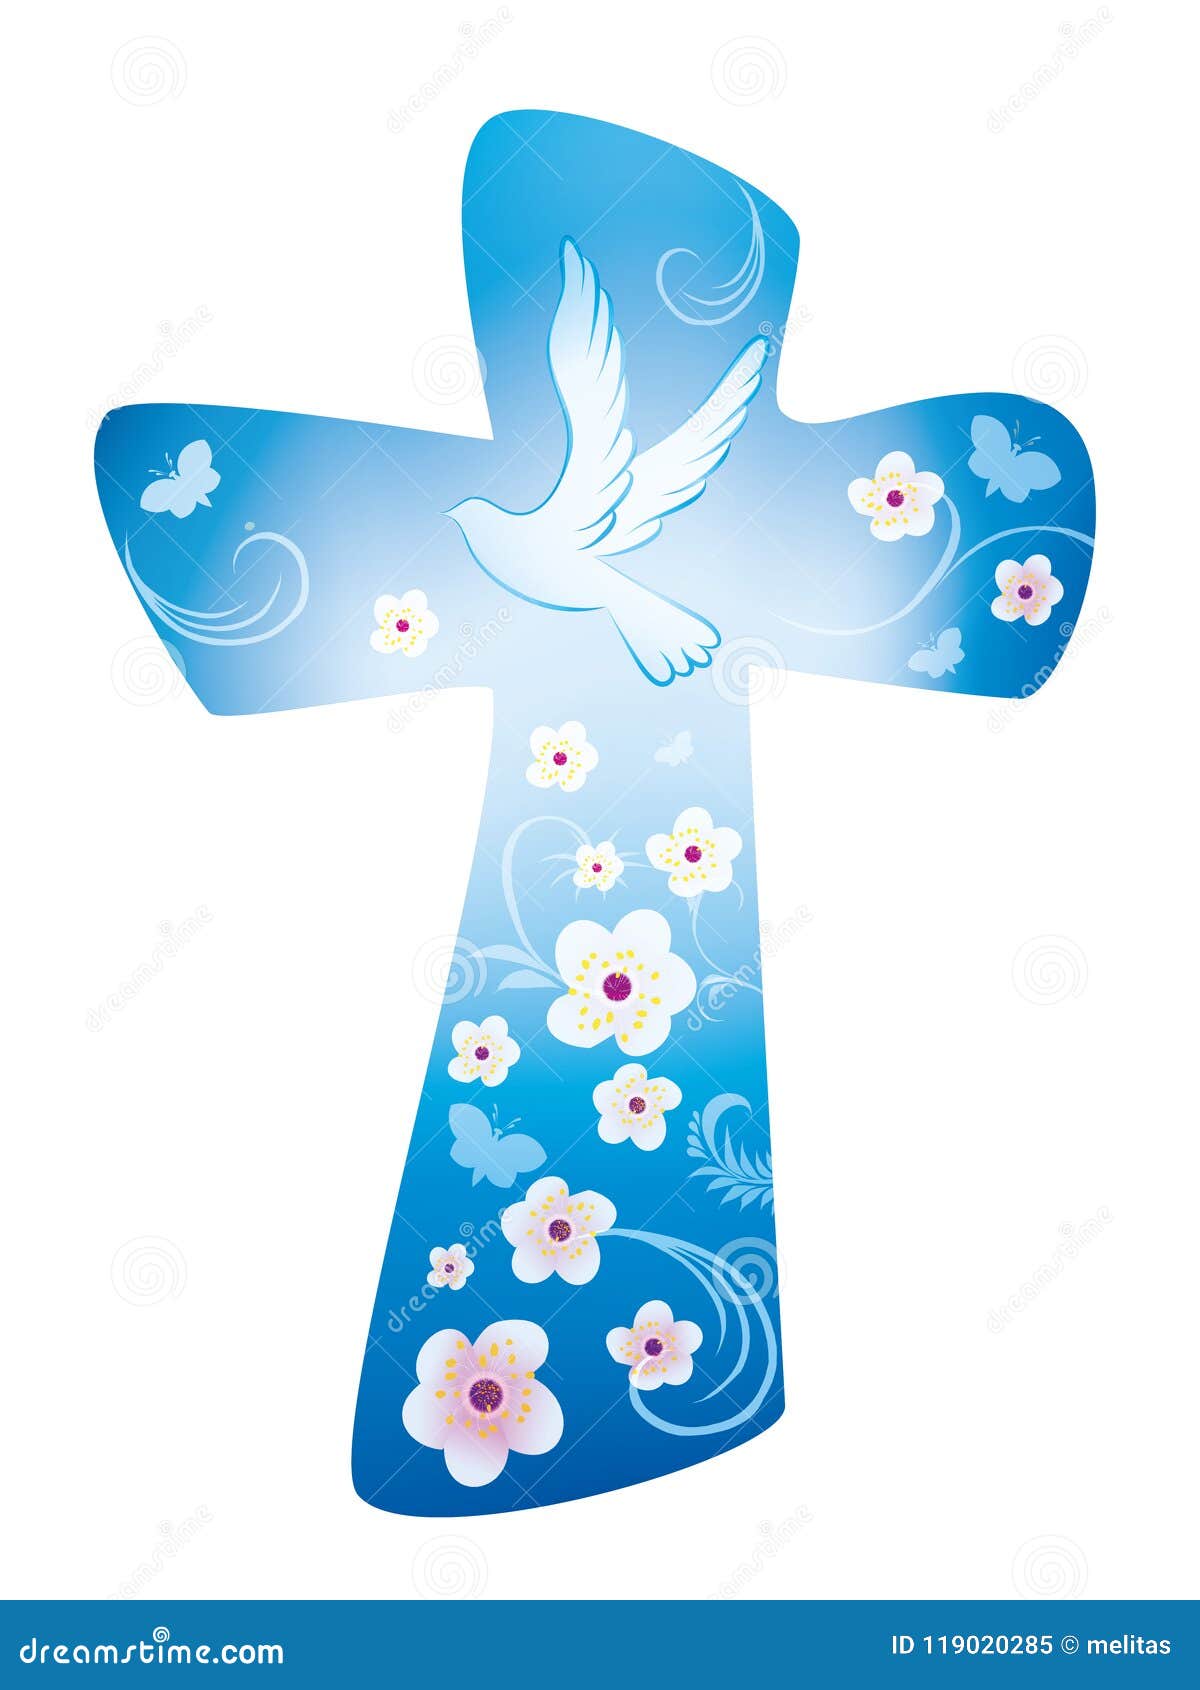 christian cross with dove and flowers on blue background